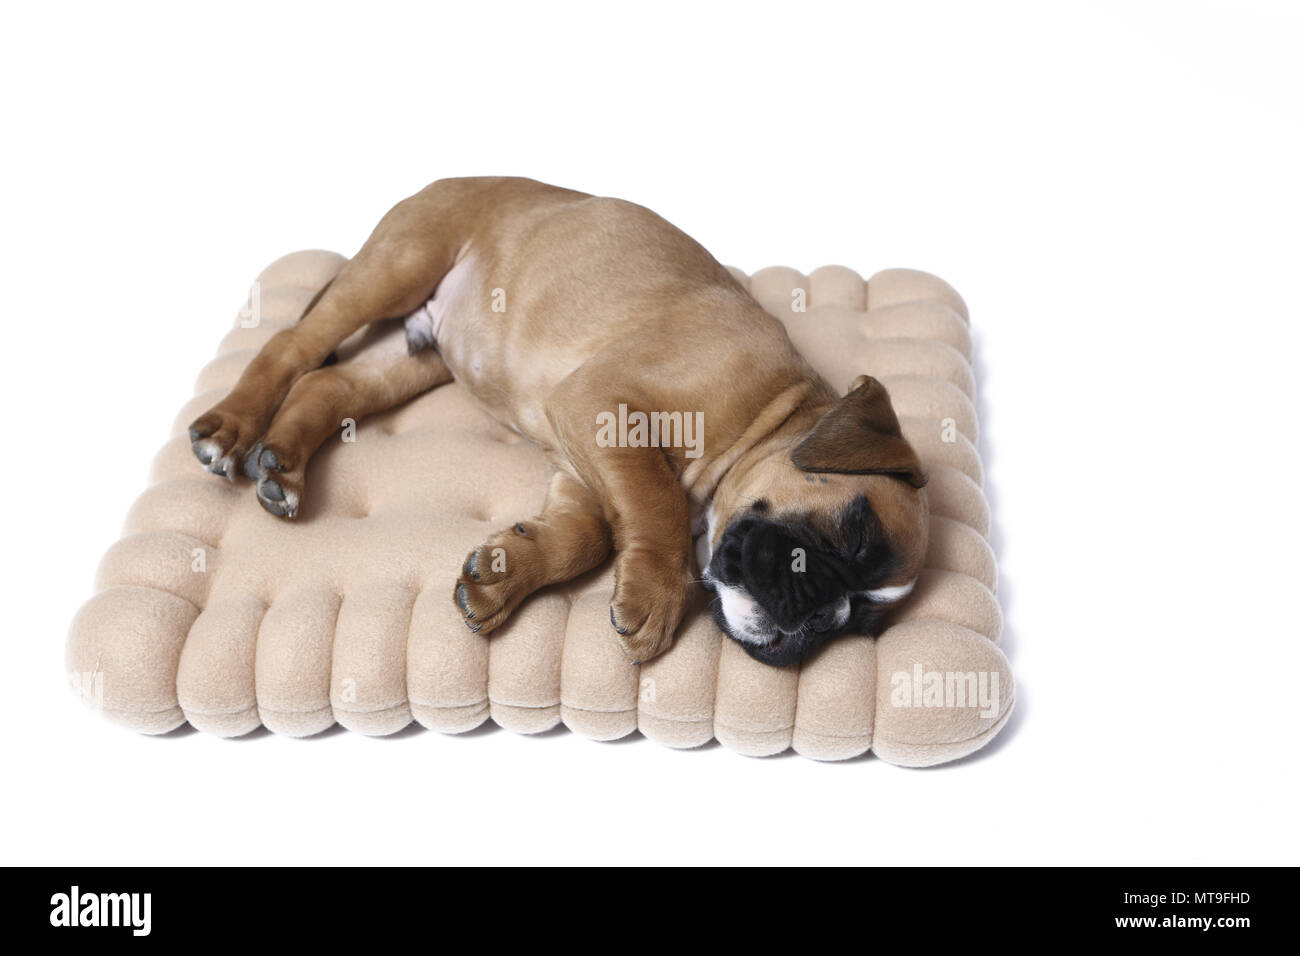 German Boxer. Puppy (7 weeks old) sleeping on a cookie-shaped cushion. Studio picture Stock Photo